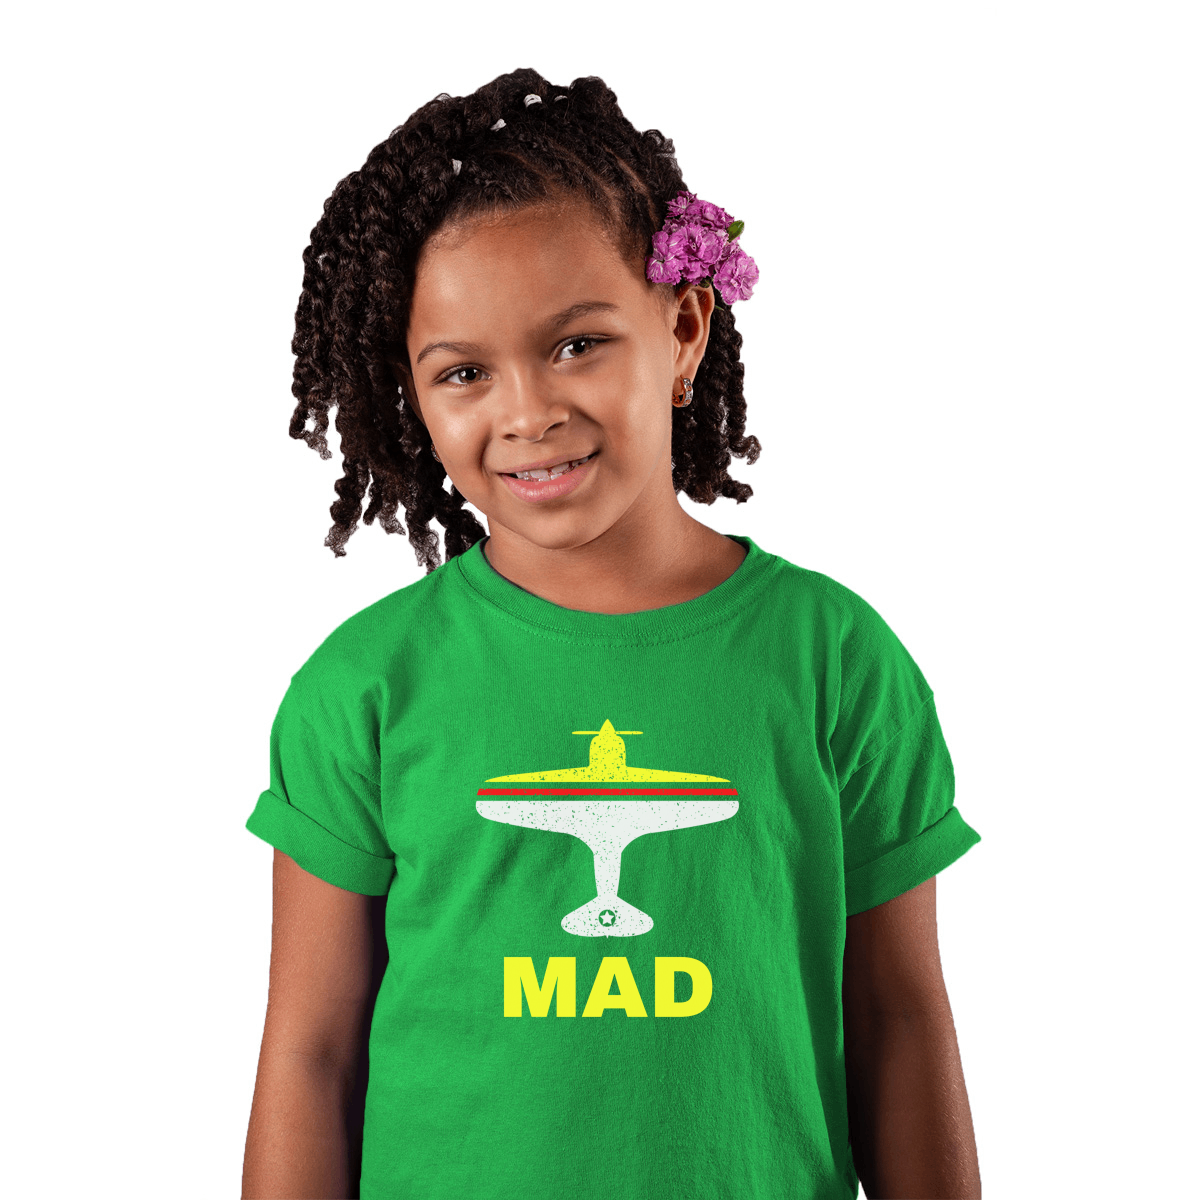 Fly Madrid MAD Airport Kids T-shirt | Green